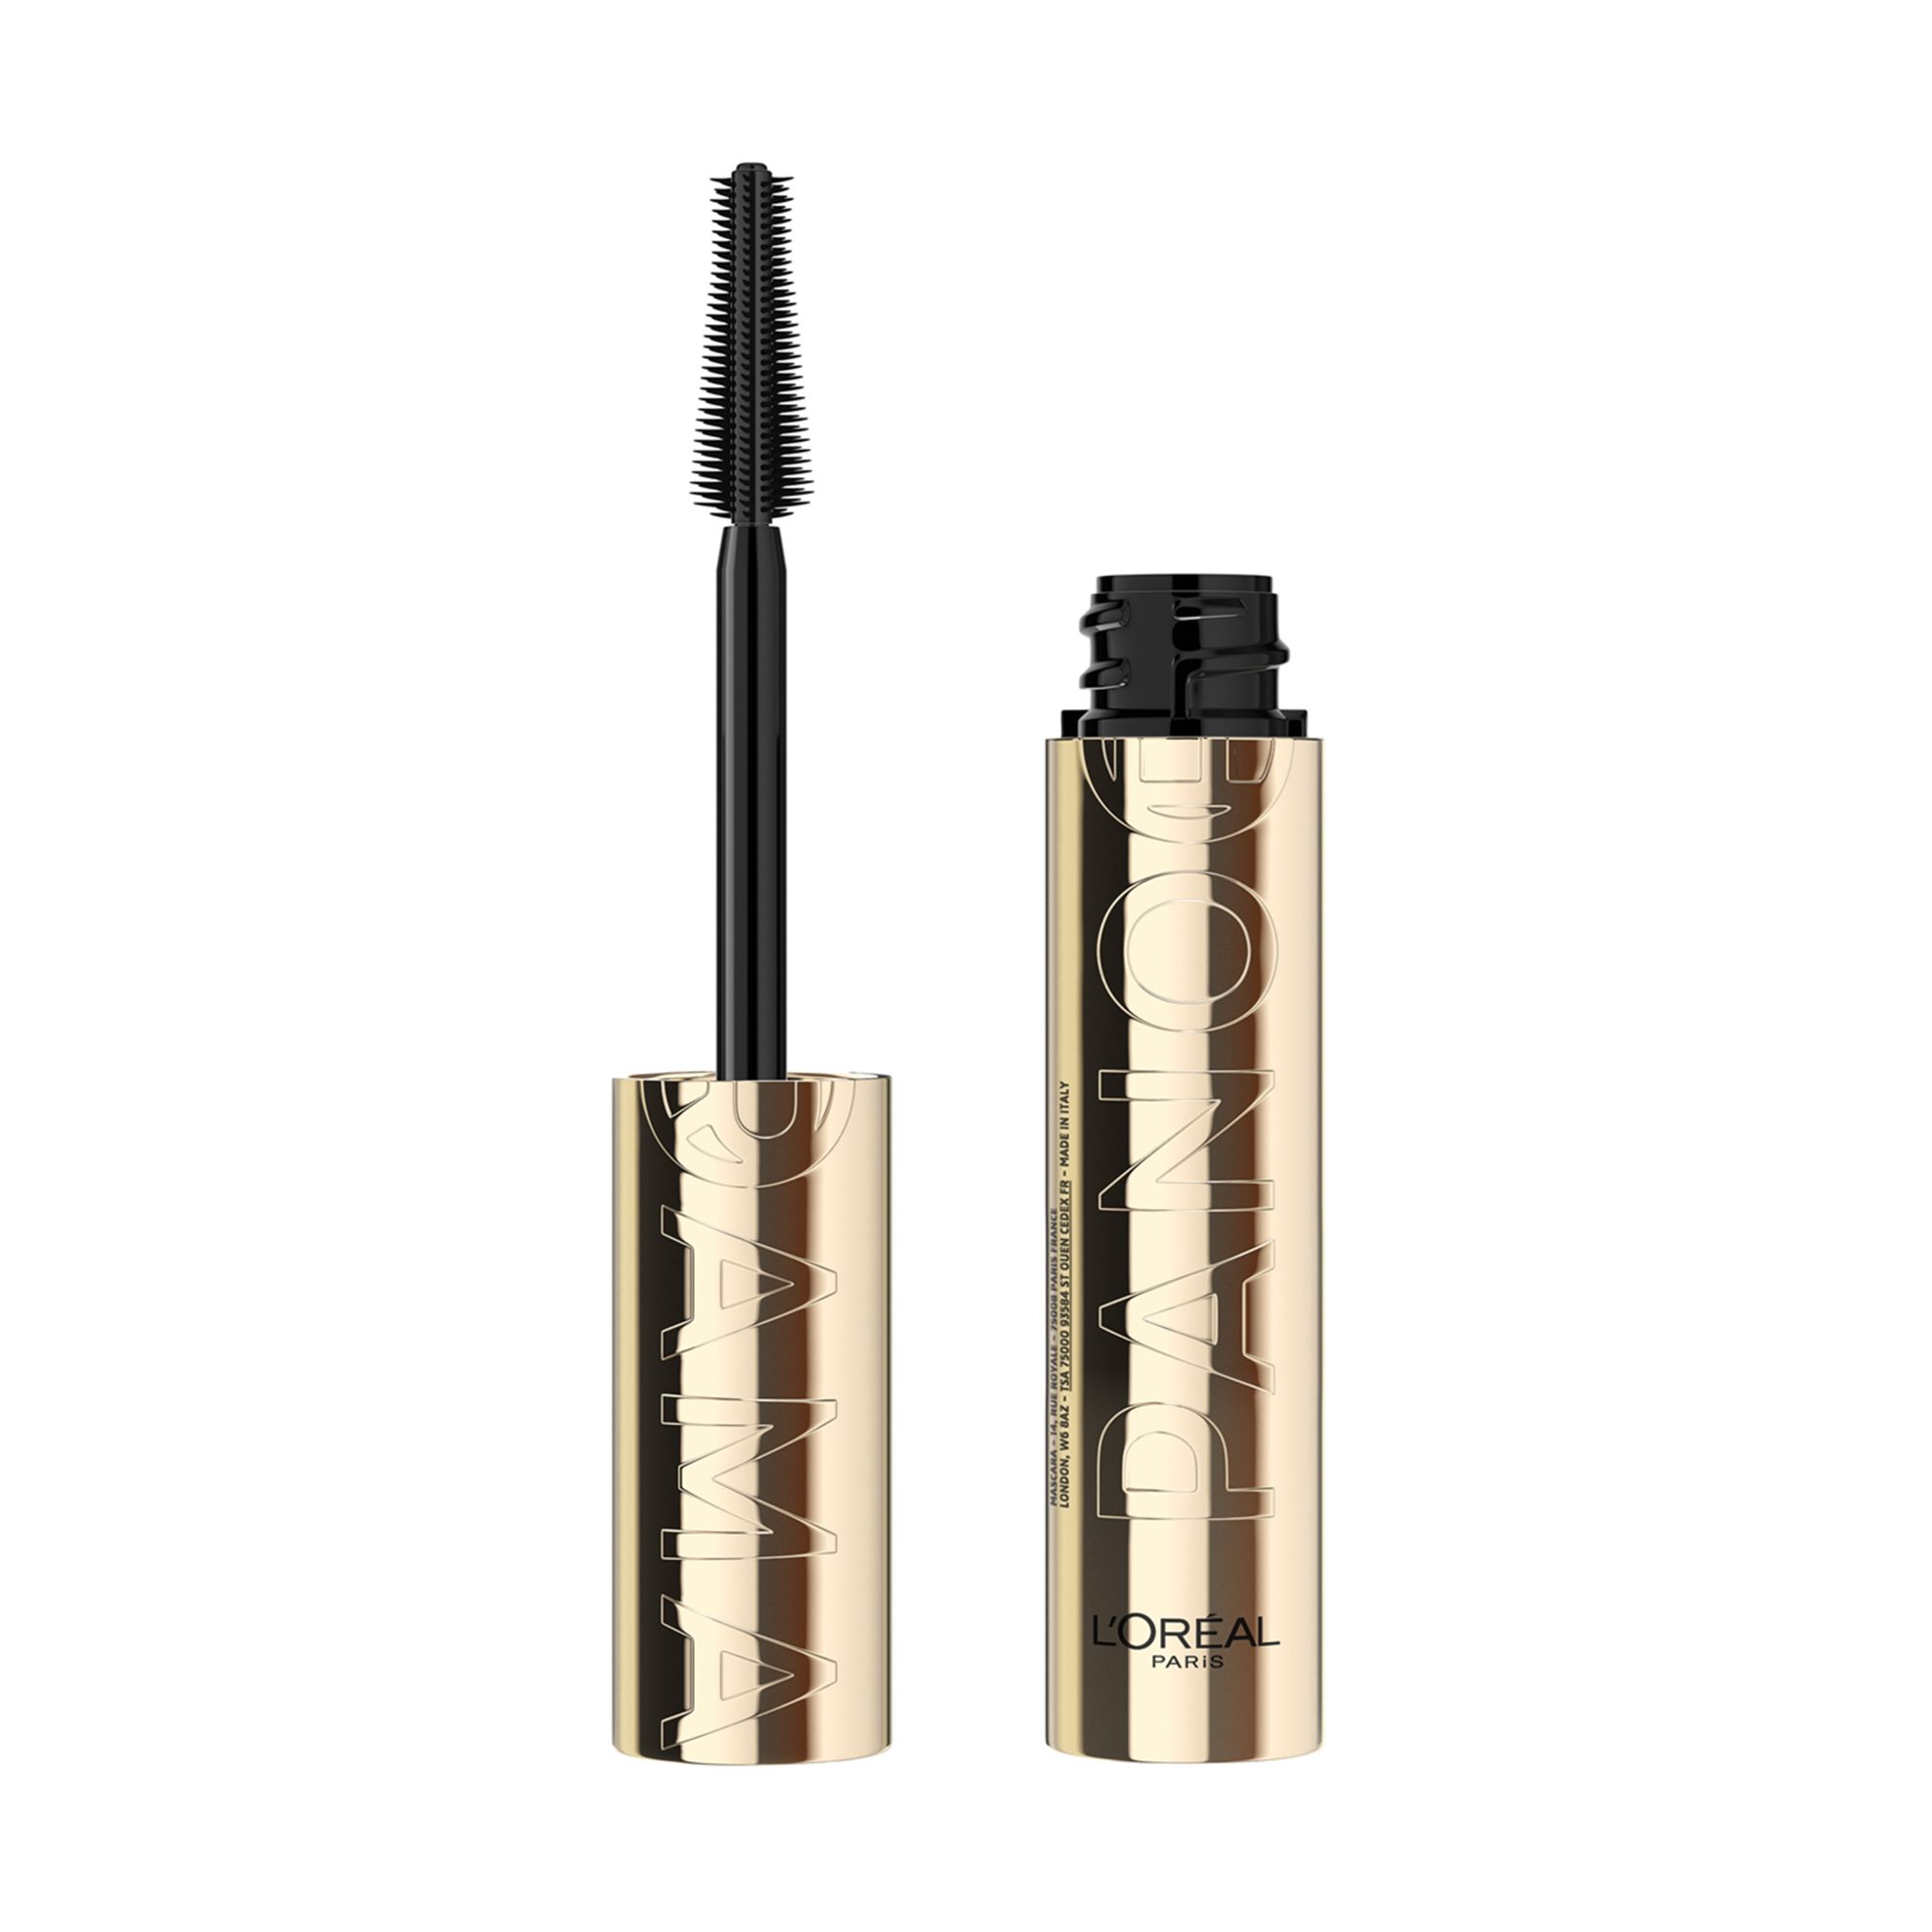 Mother's Day Gift - L'Oréal Panorama Mascara